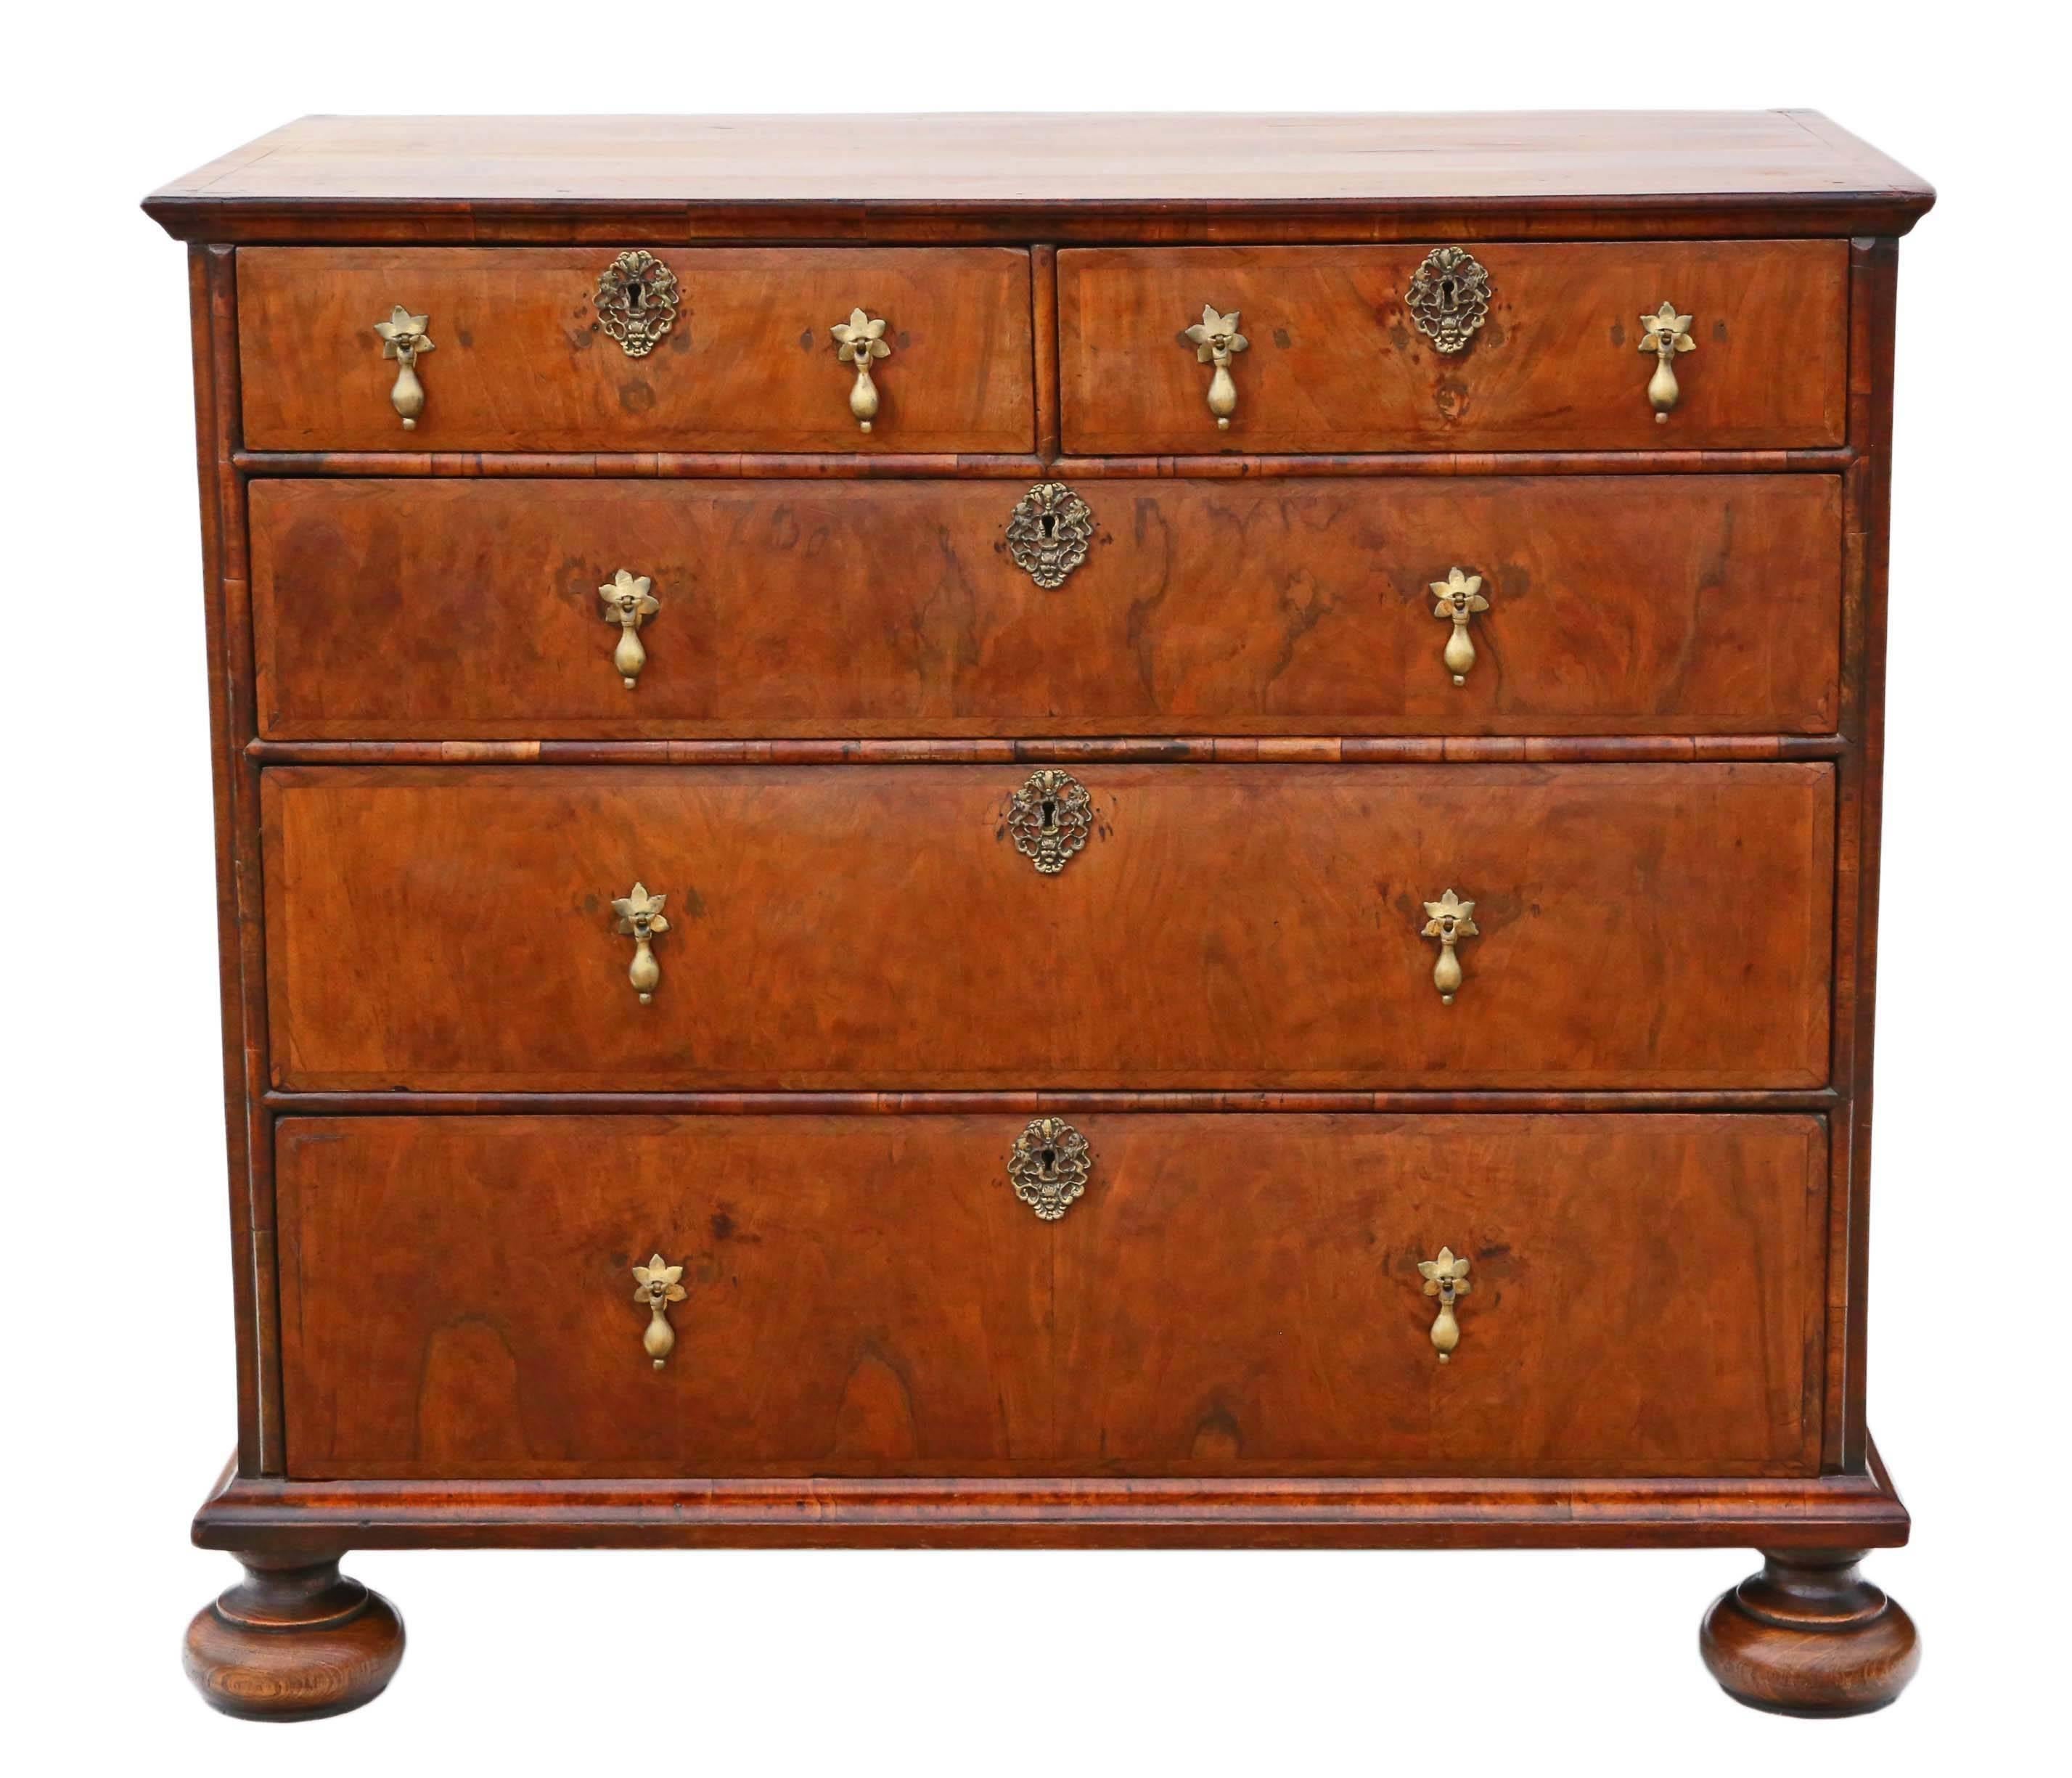 Antique quality William & Mary circa 1690-1700 walnut chest of drawers. The best patina.

Solid and strong, with no loose joints. Full of age, character and charm. A good piece of antique furniture.

Oak lined drawers, that slide